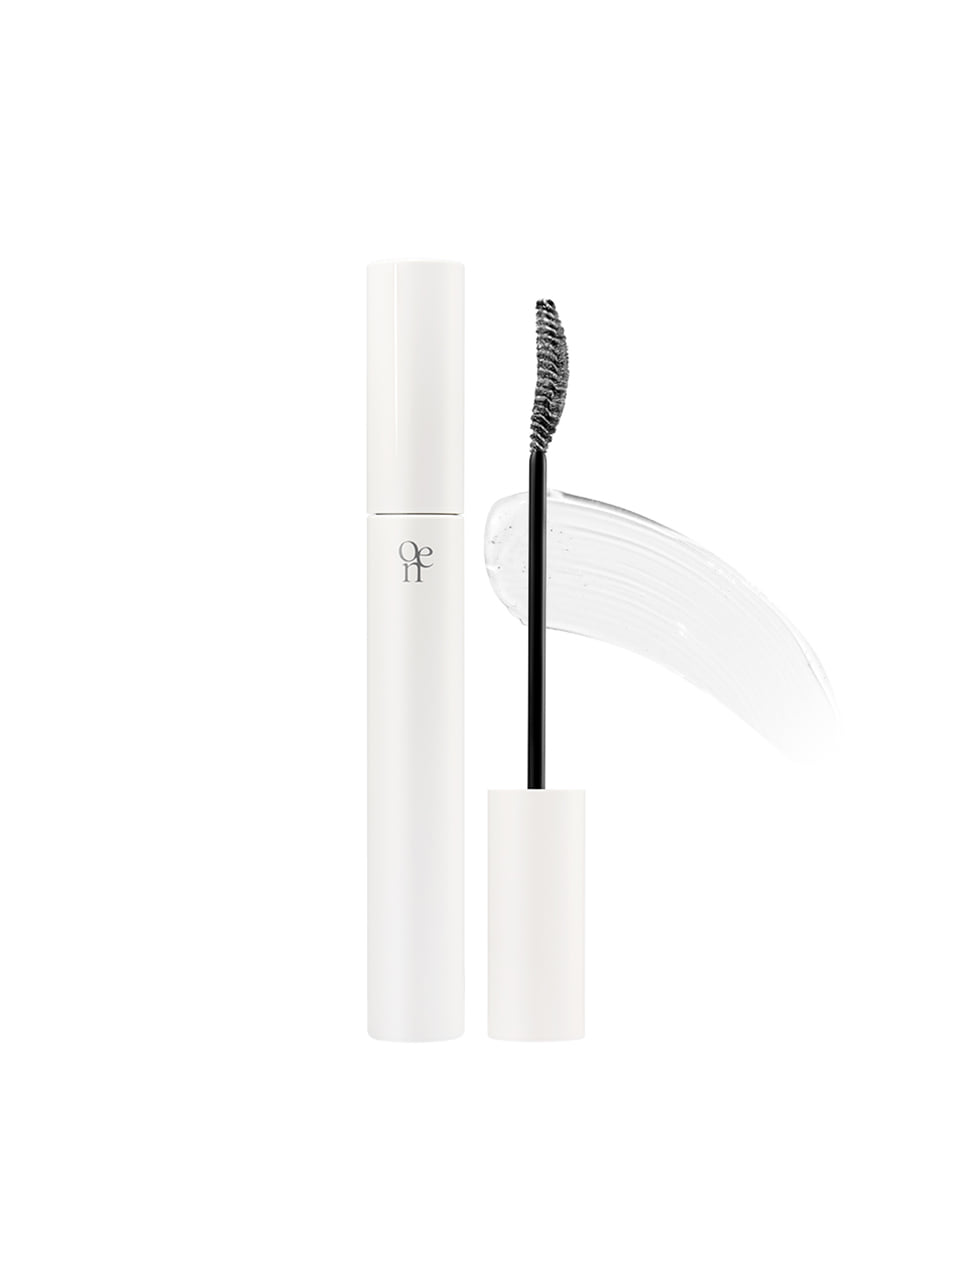 Airy Fit Mascara 00 Fixer